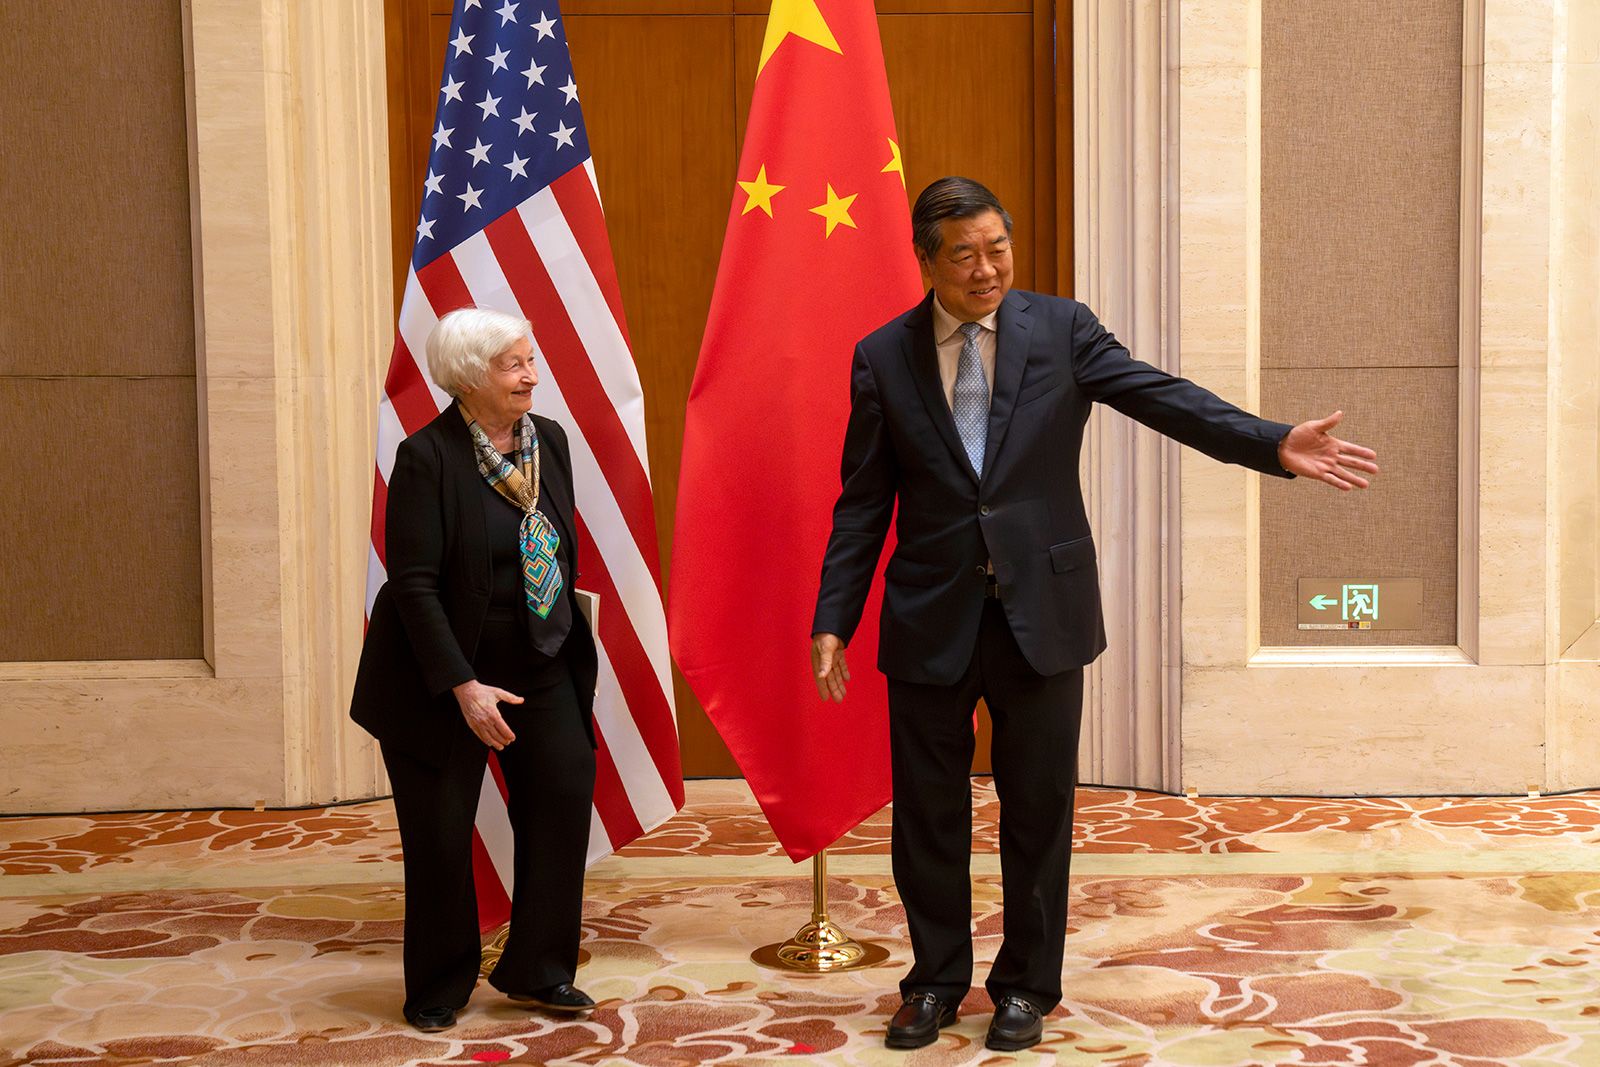 BEIJING, CHINA - JULY 08: Chinese Vice Premier He Lifeng (R) gestures to Treasury Secretary Janet Yellen during a meeting at the Diaoyutai State Guesthouse on July 8, 2023 in Beijing, China. (Photo by Mark Schiefelbein - Pool/Getty Images)